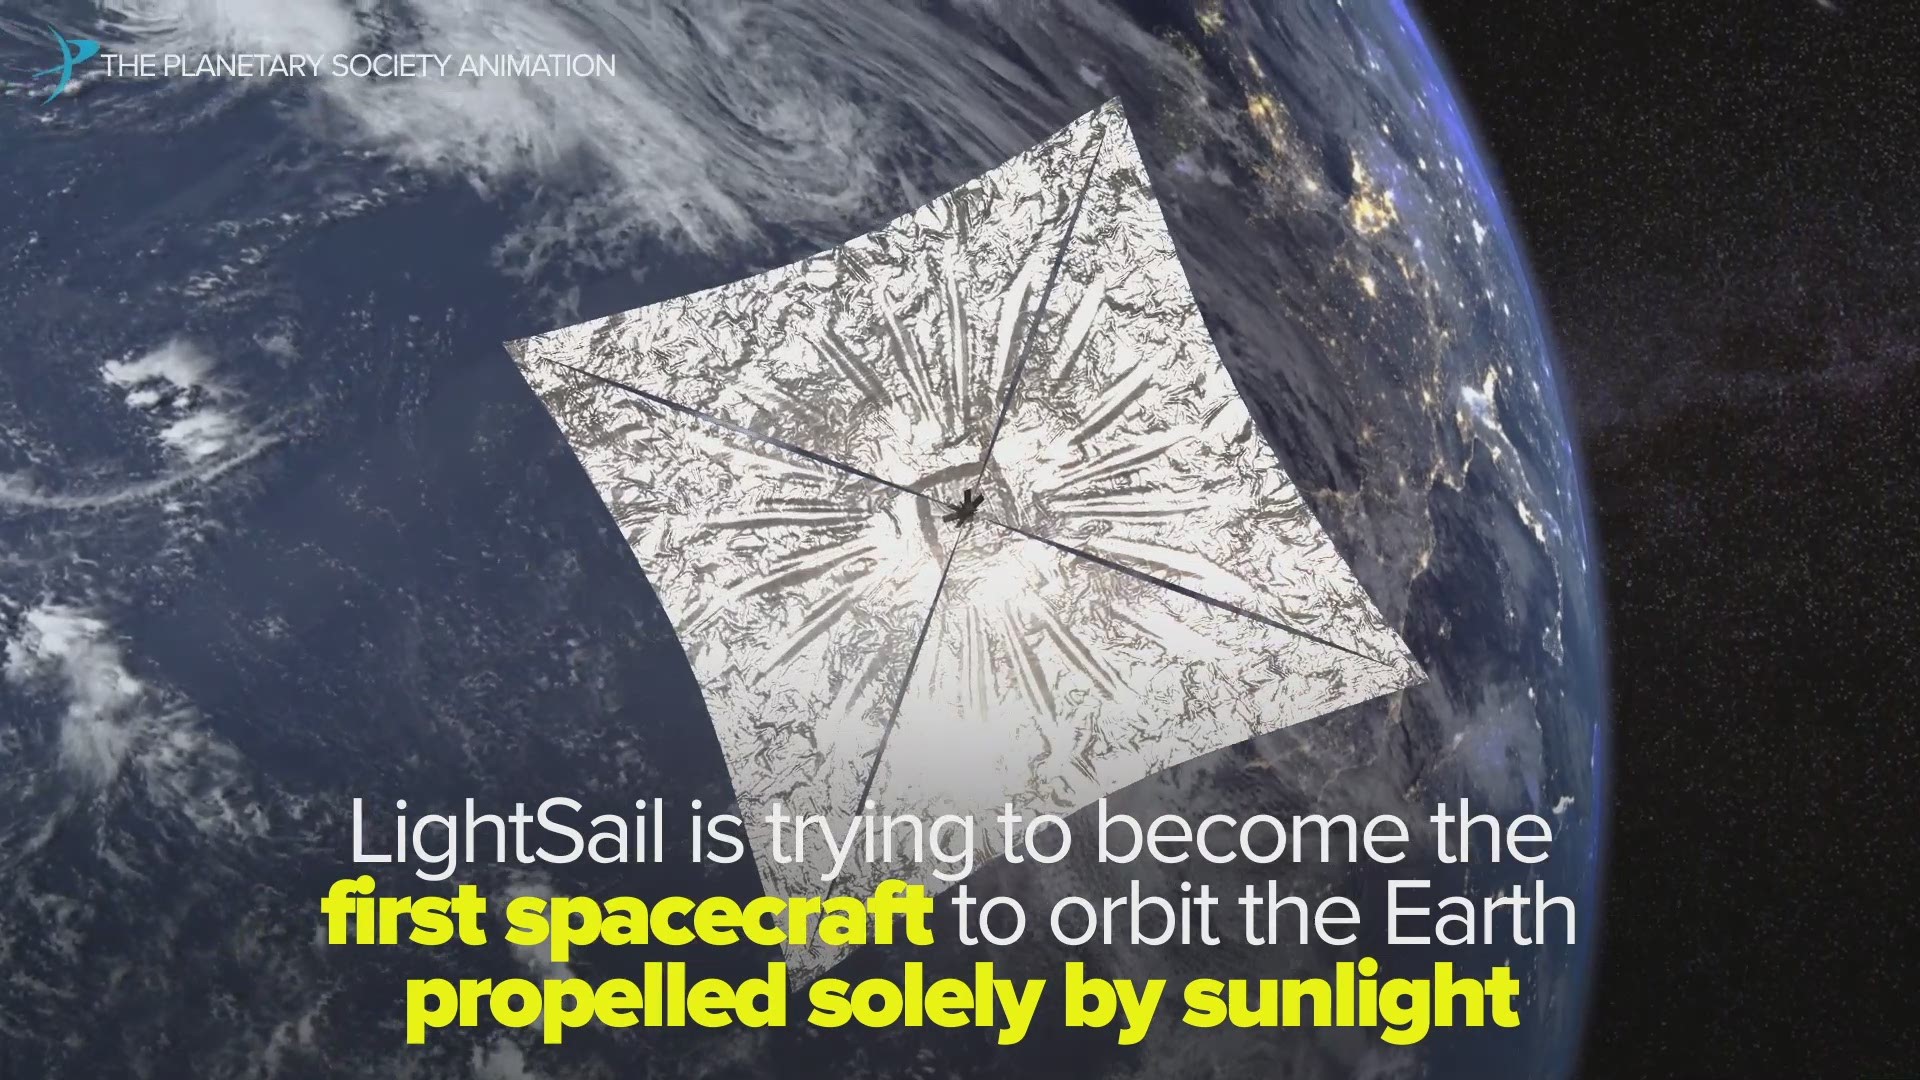 LightSail is attempting to be the first spacecraft to orbit the Earth while being propelled solely by sunlight.